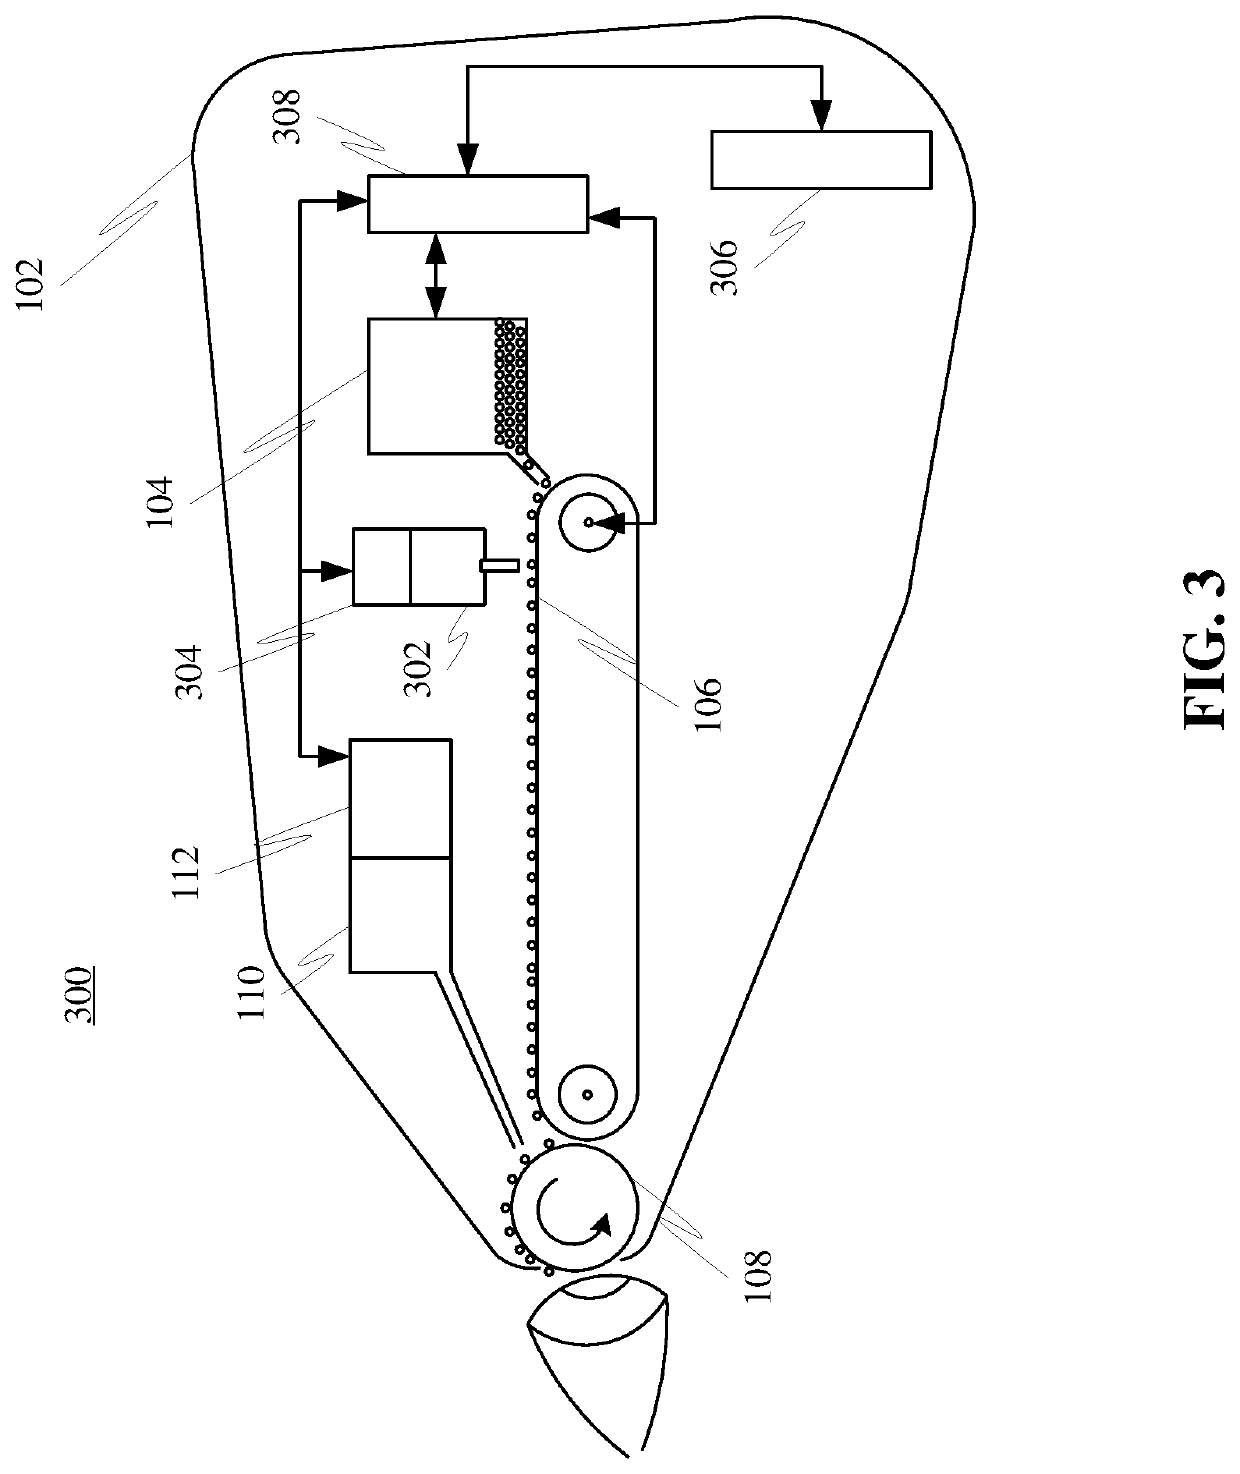 Systems and apparatuses to facilitate dispensing of eyelashes over an eye of a user